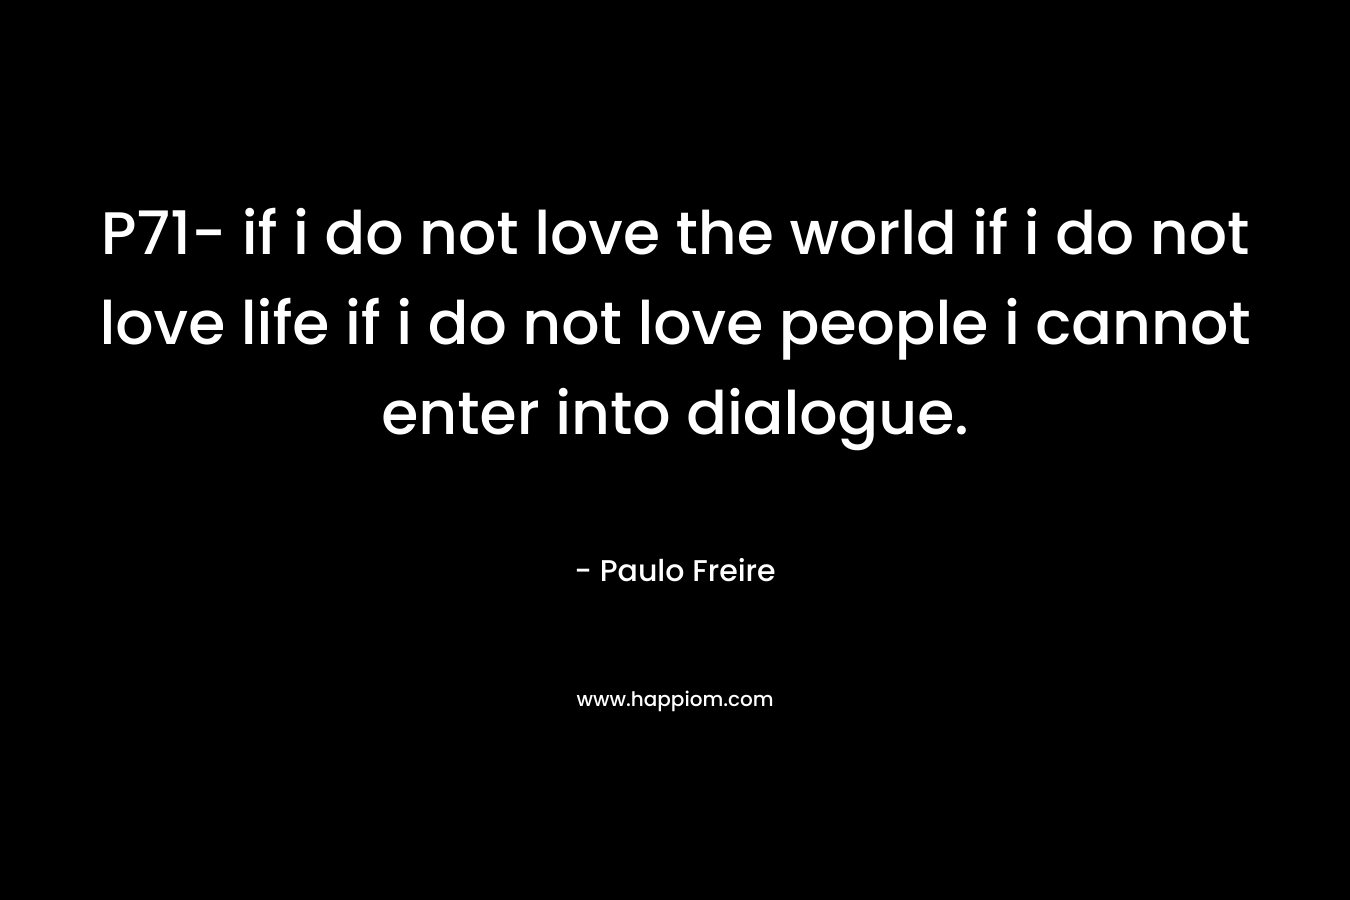 P71- if i do not love the world if i do not love life if i do not love people i cannot enter into dialogue.